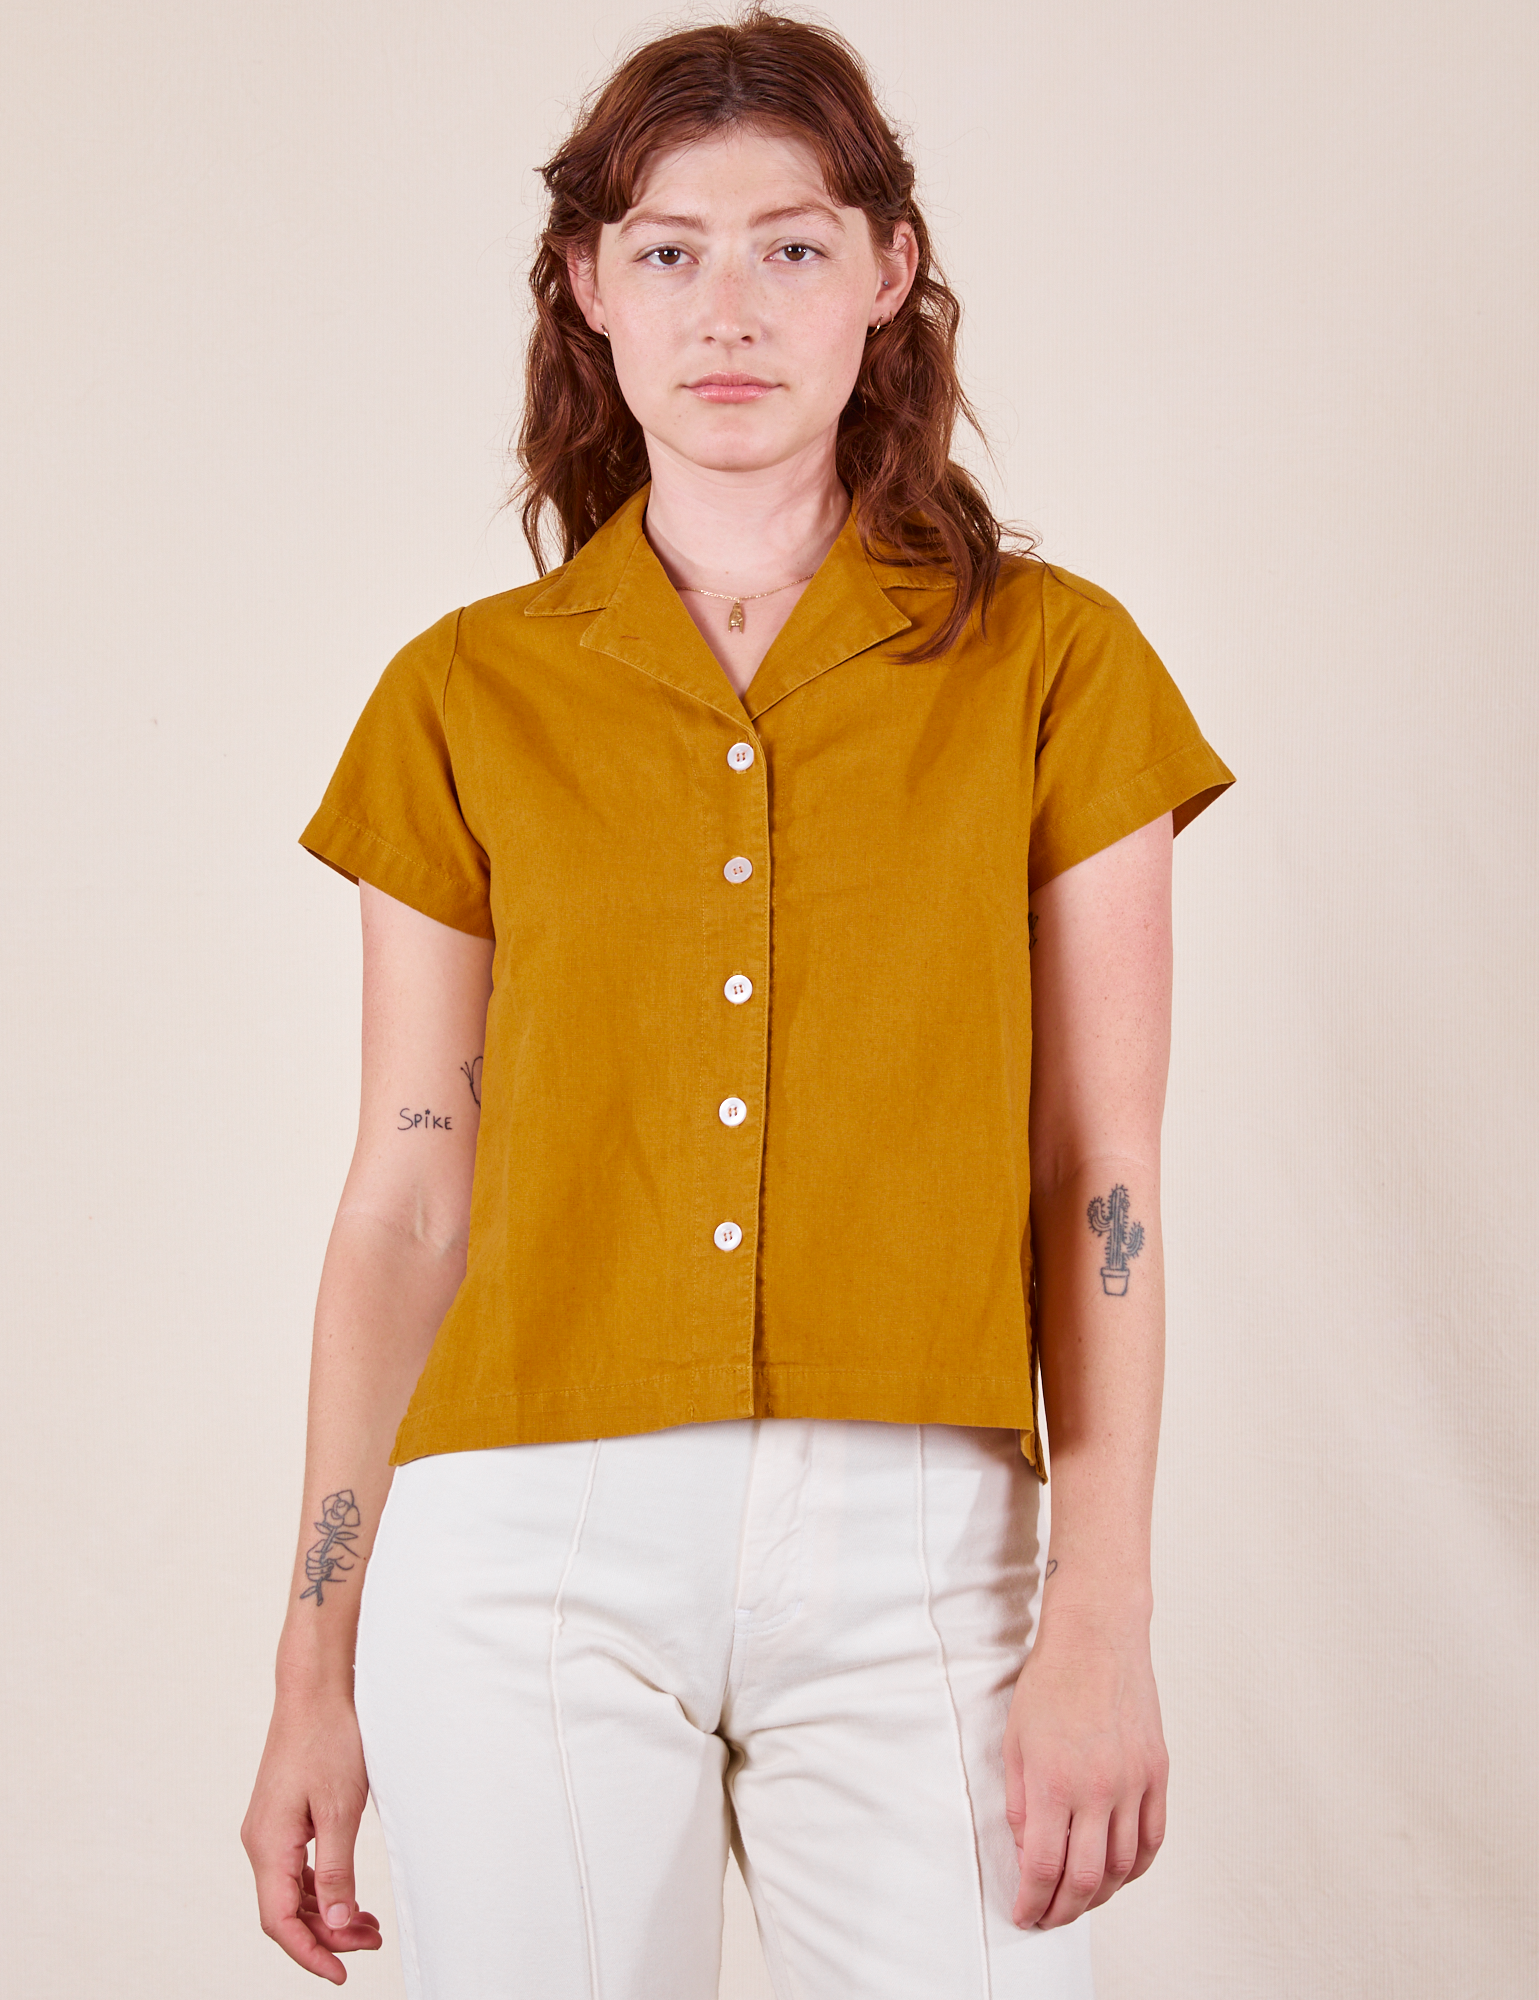 Alex is wearing Pantry Button-Up in Spicy Mustard